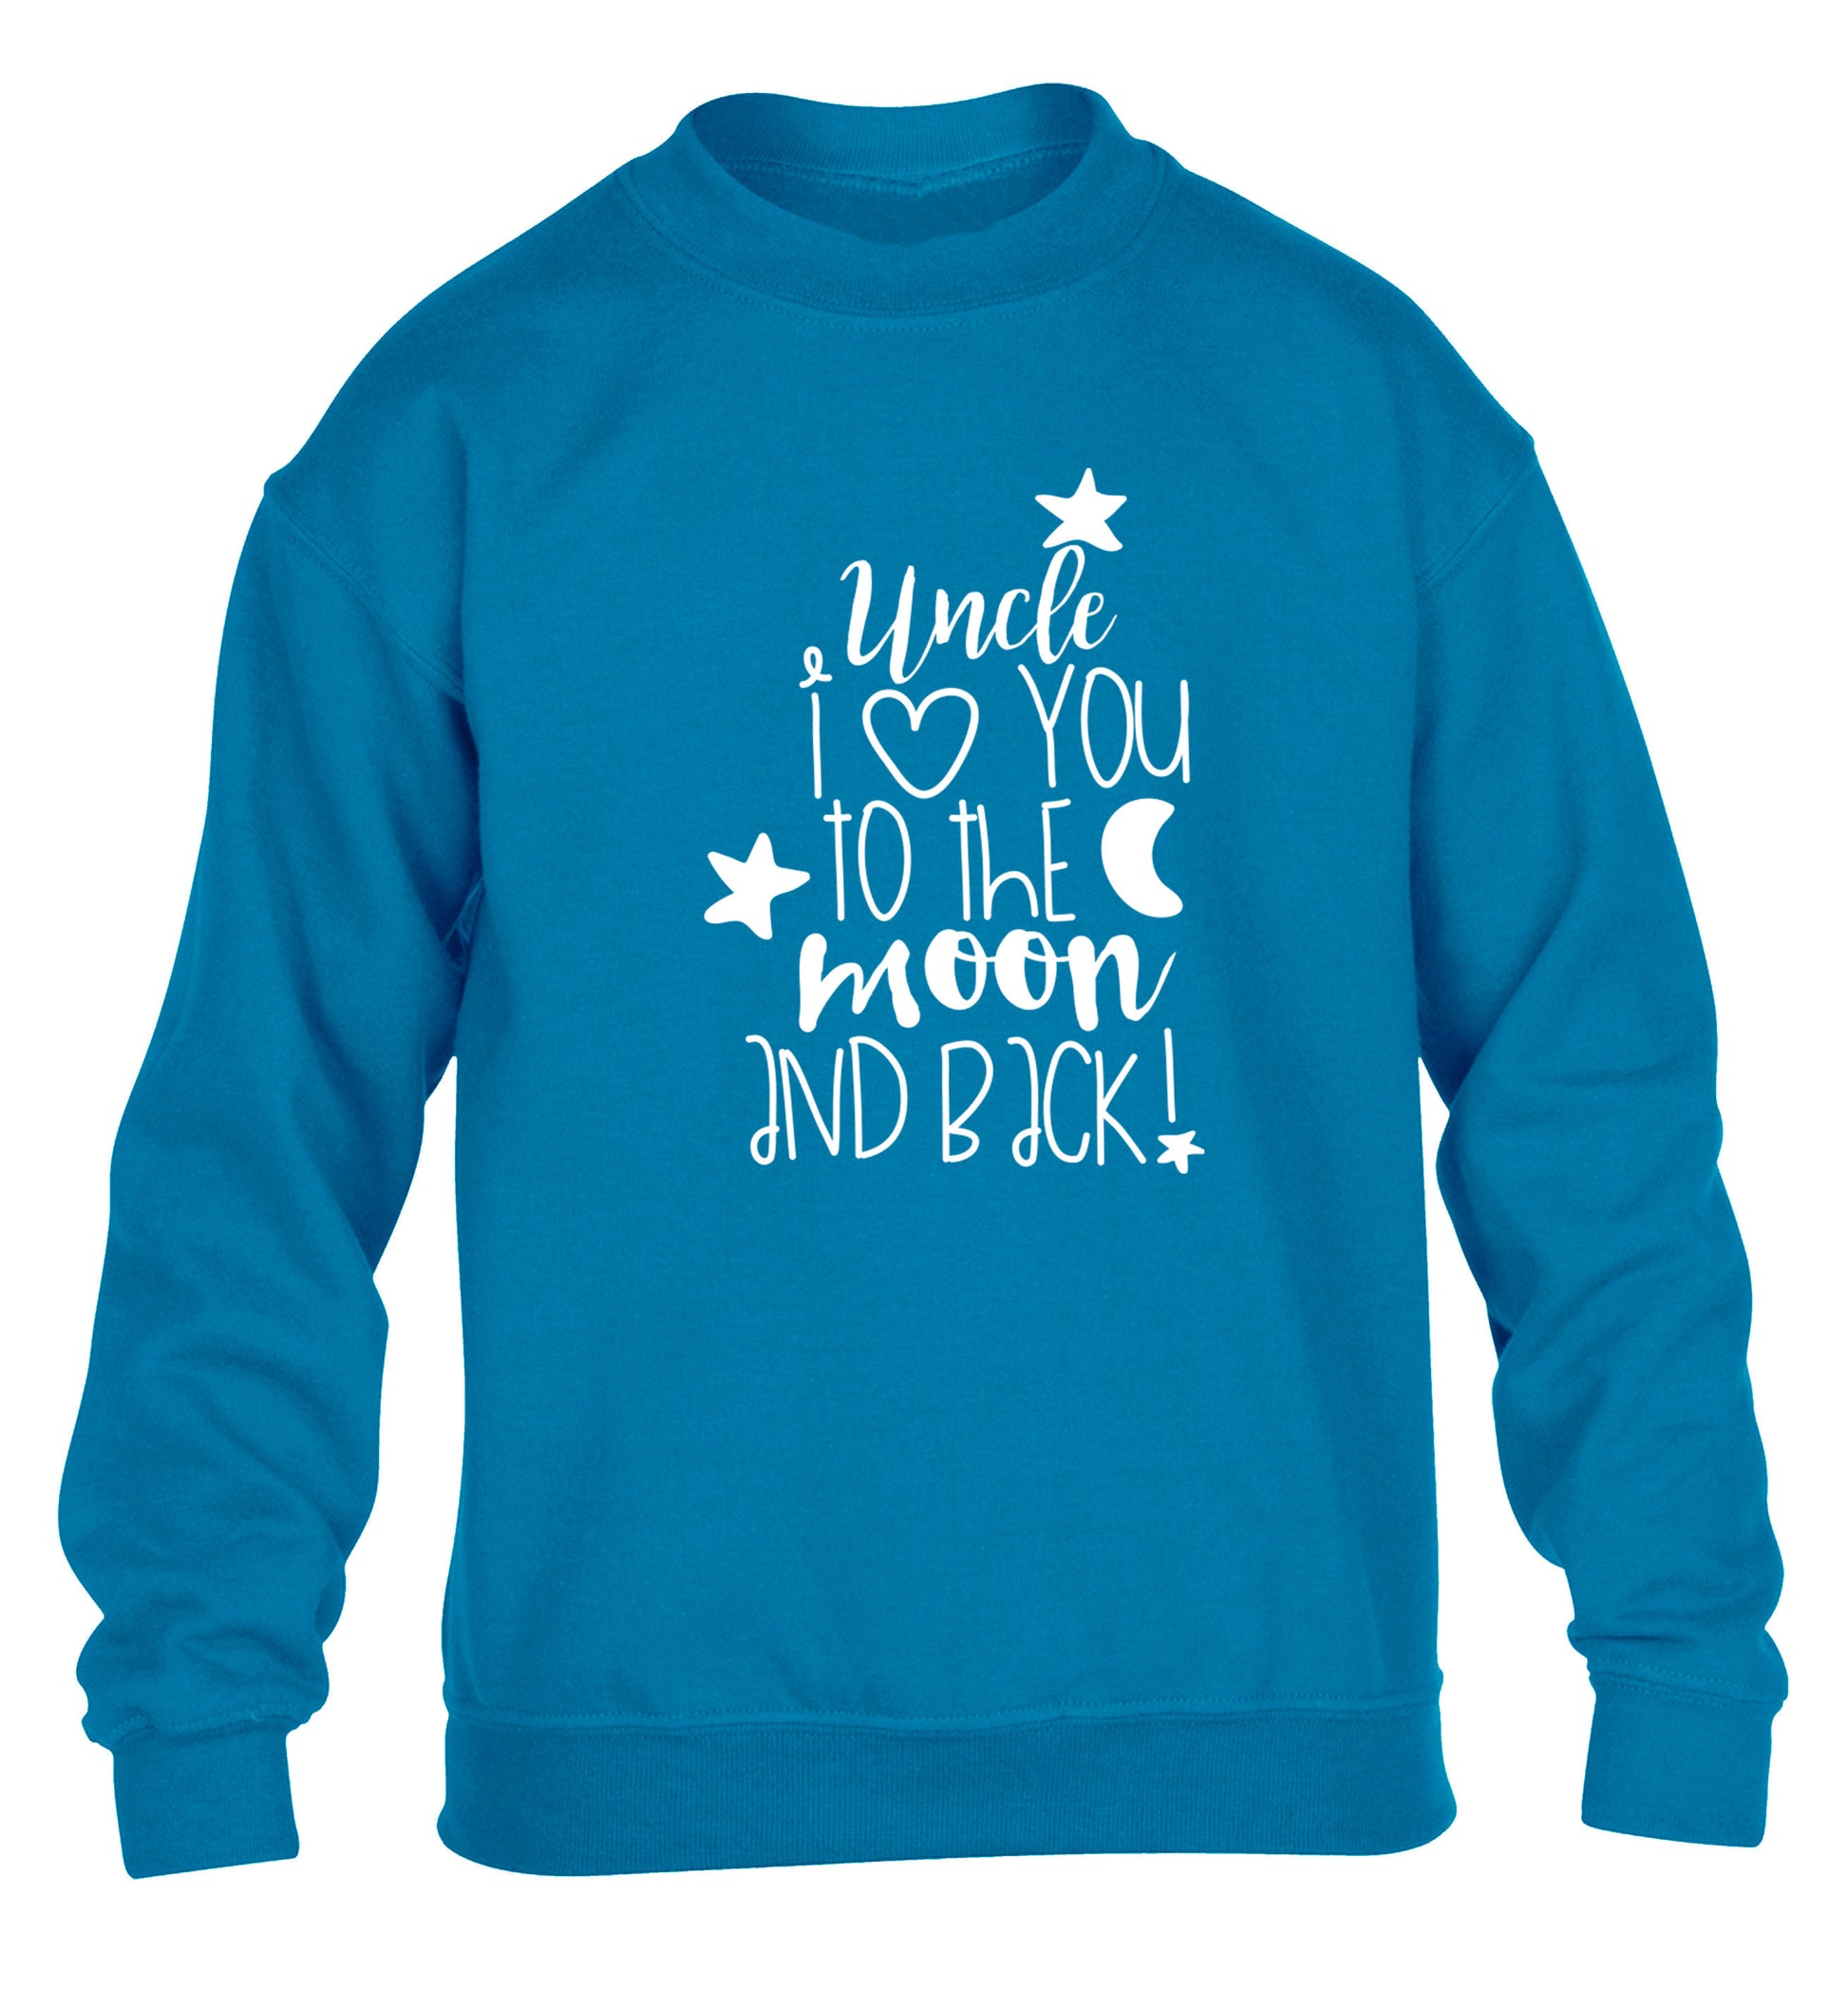 Uncle I love you to the moon and back children's blue  sweater 12-14 Years